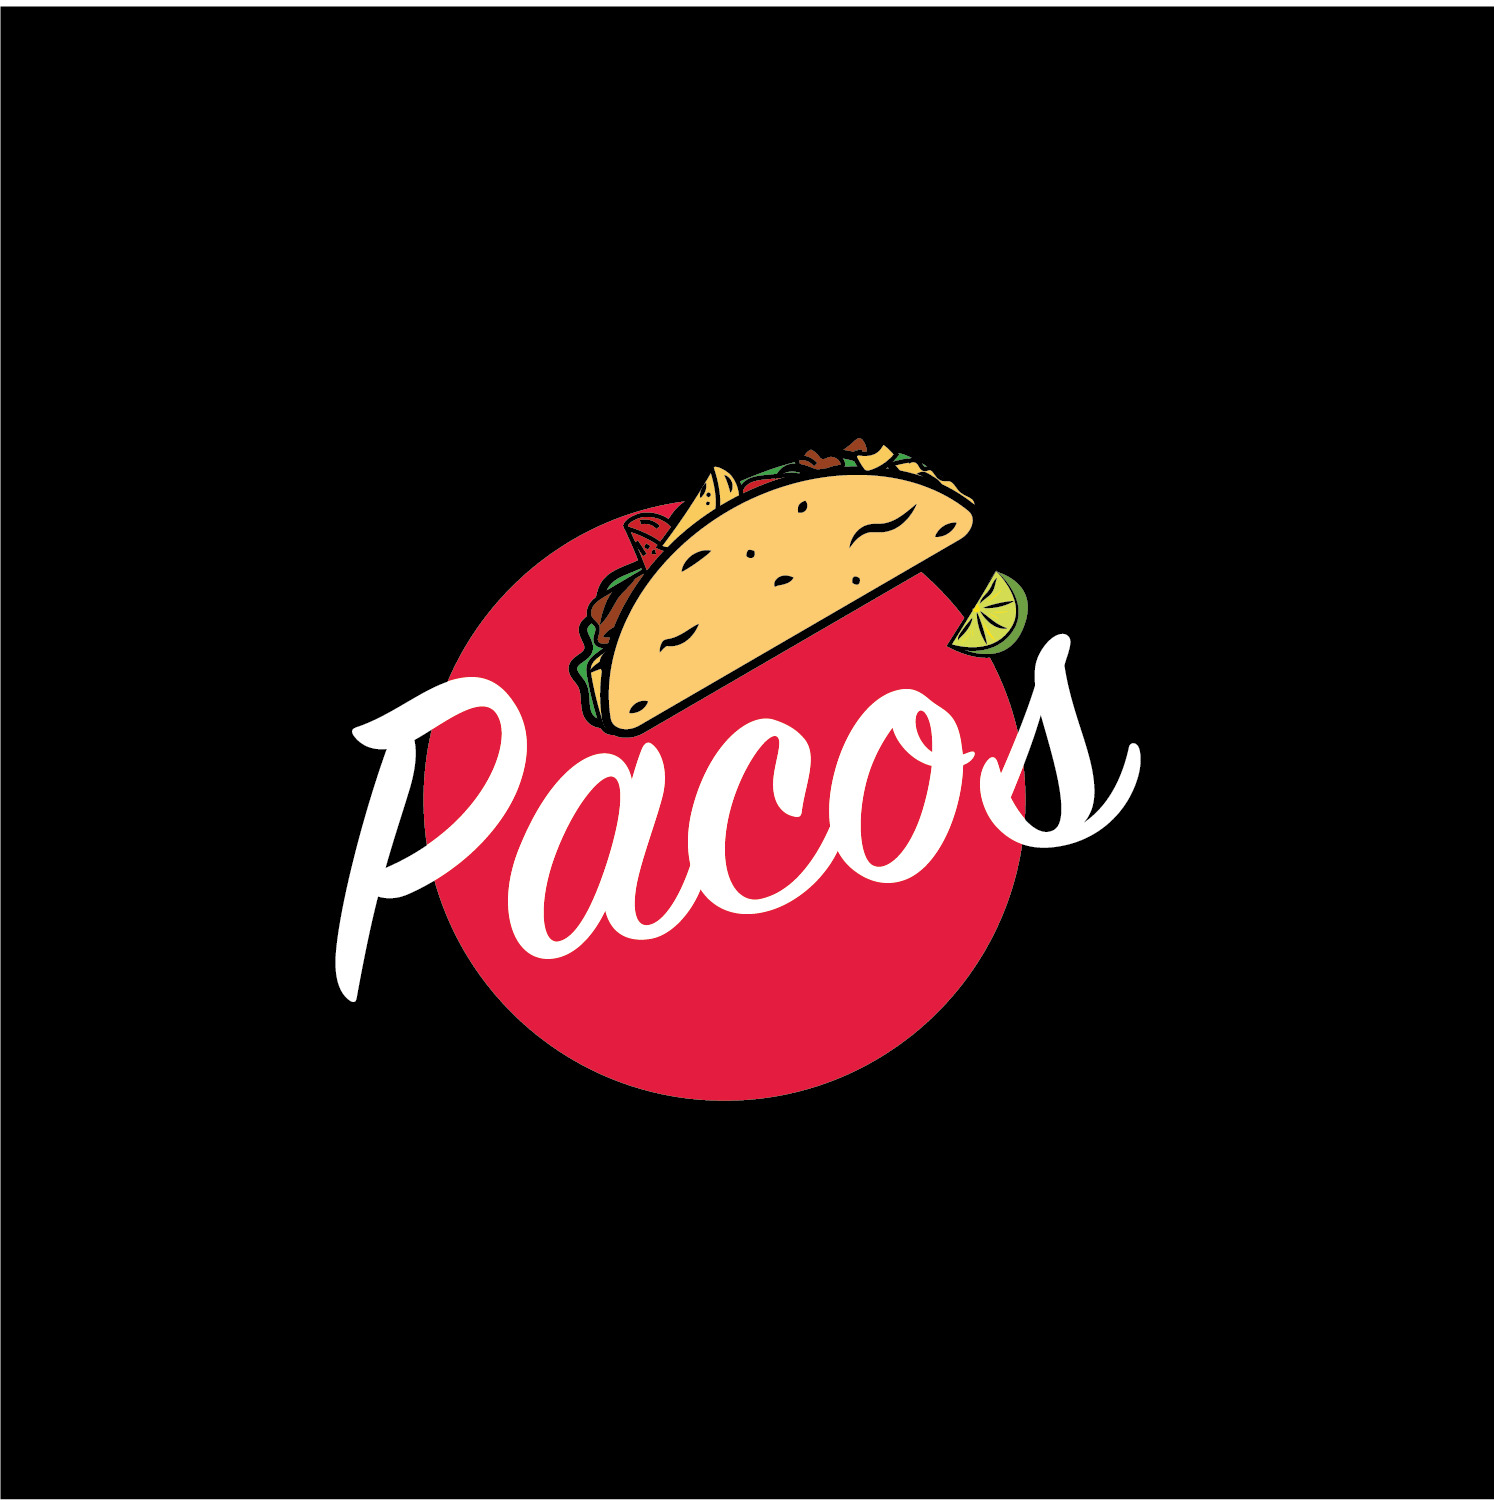 Pacost